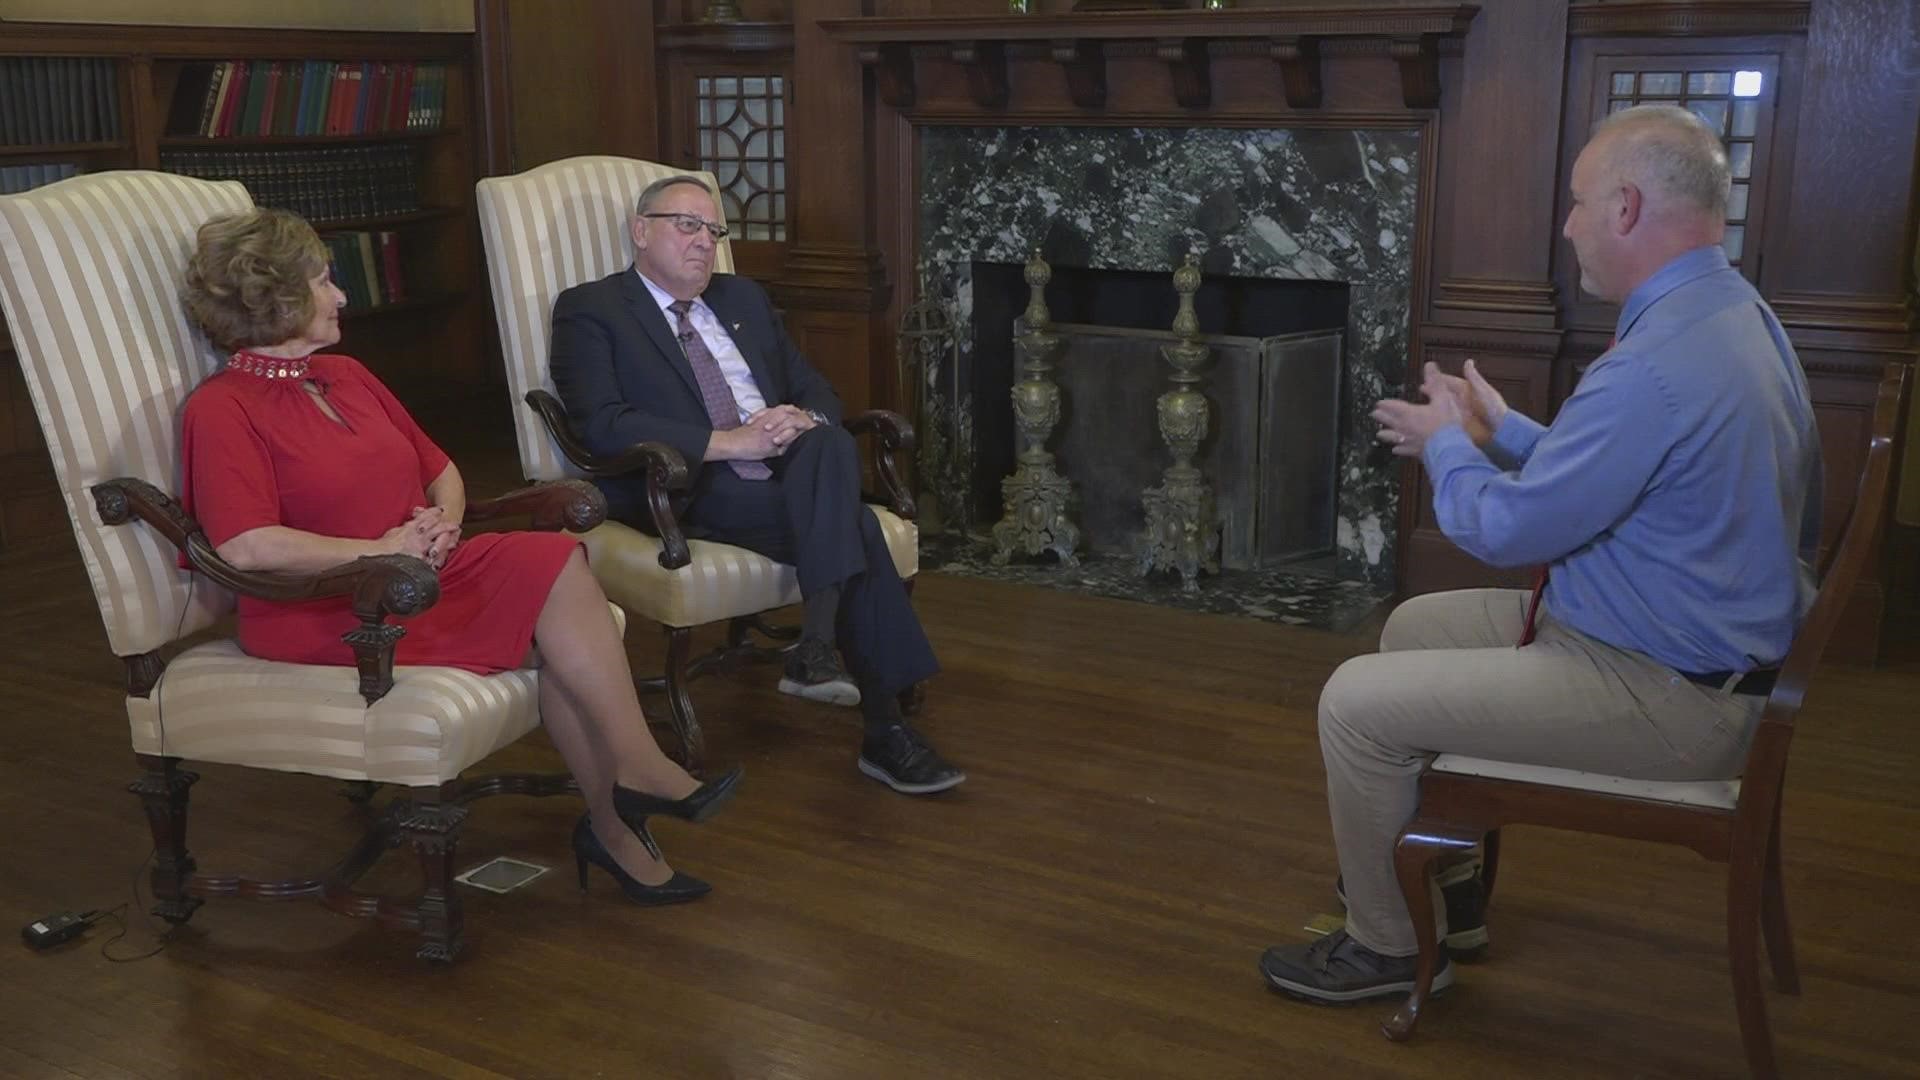 NEWS CENTER Maine's Lee Goldberg sat down with the former governor and his wife, Ann, to talk about why he has decided to run for the job once again.